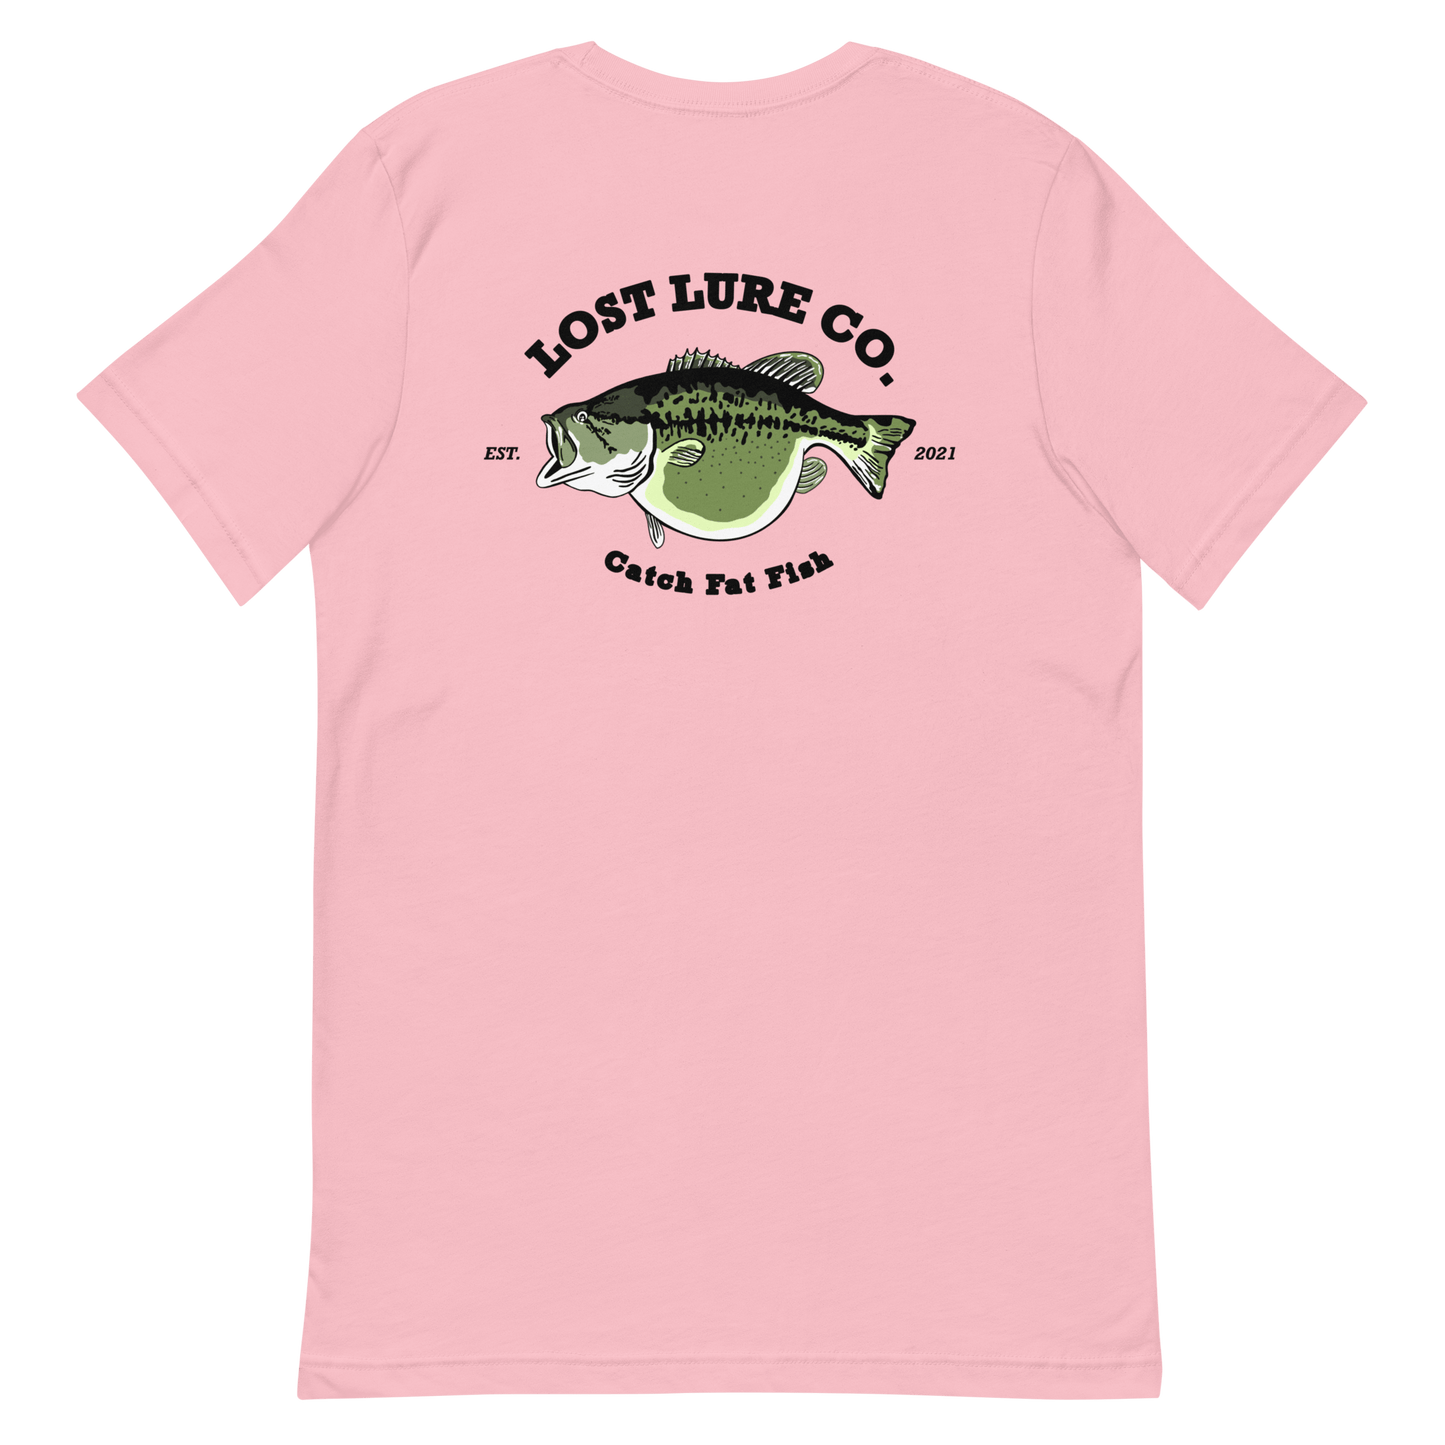 Bass fishing shirt. It has a drawing of a fat bass and it reads “lost lure co, catch fat fish”. The bass design is on the back, the lost lure logo is on the front. Pink woman’s shirt, back side